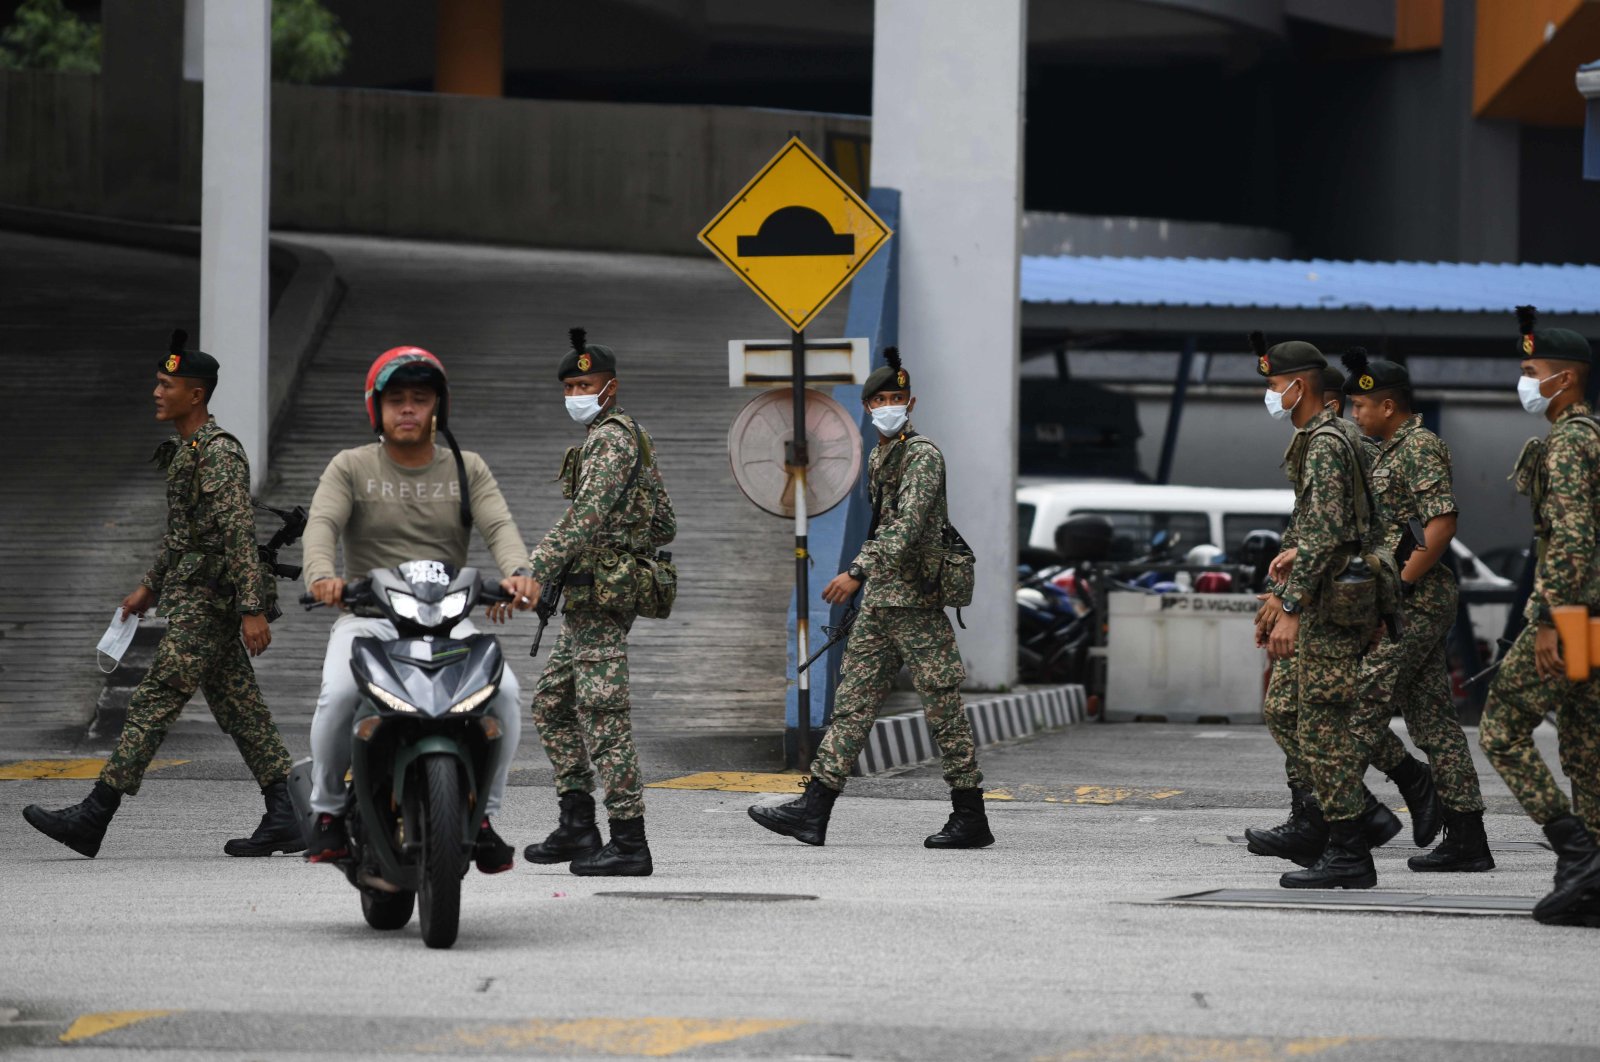 A motorcyclist rides past soldiers wearing face masks inside a police station during the control of movement in Kuala Lumpur amid fears over the spread of the coronavirus, Sunday, March 22, 2020. (AFP Photo)